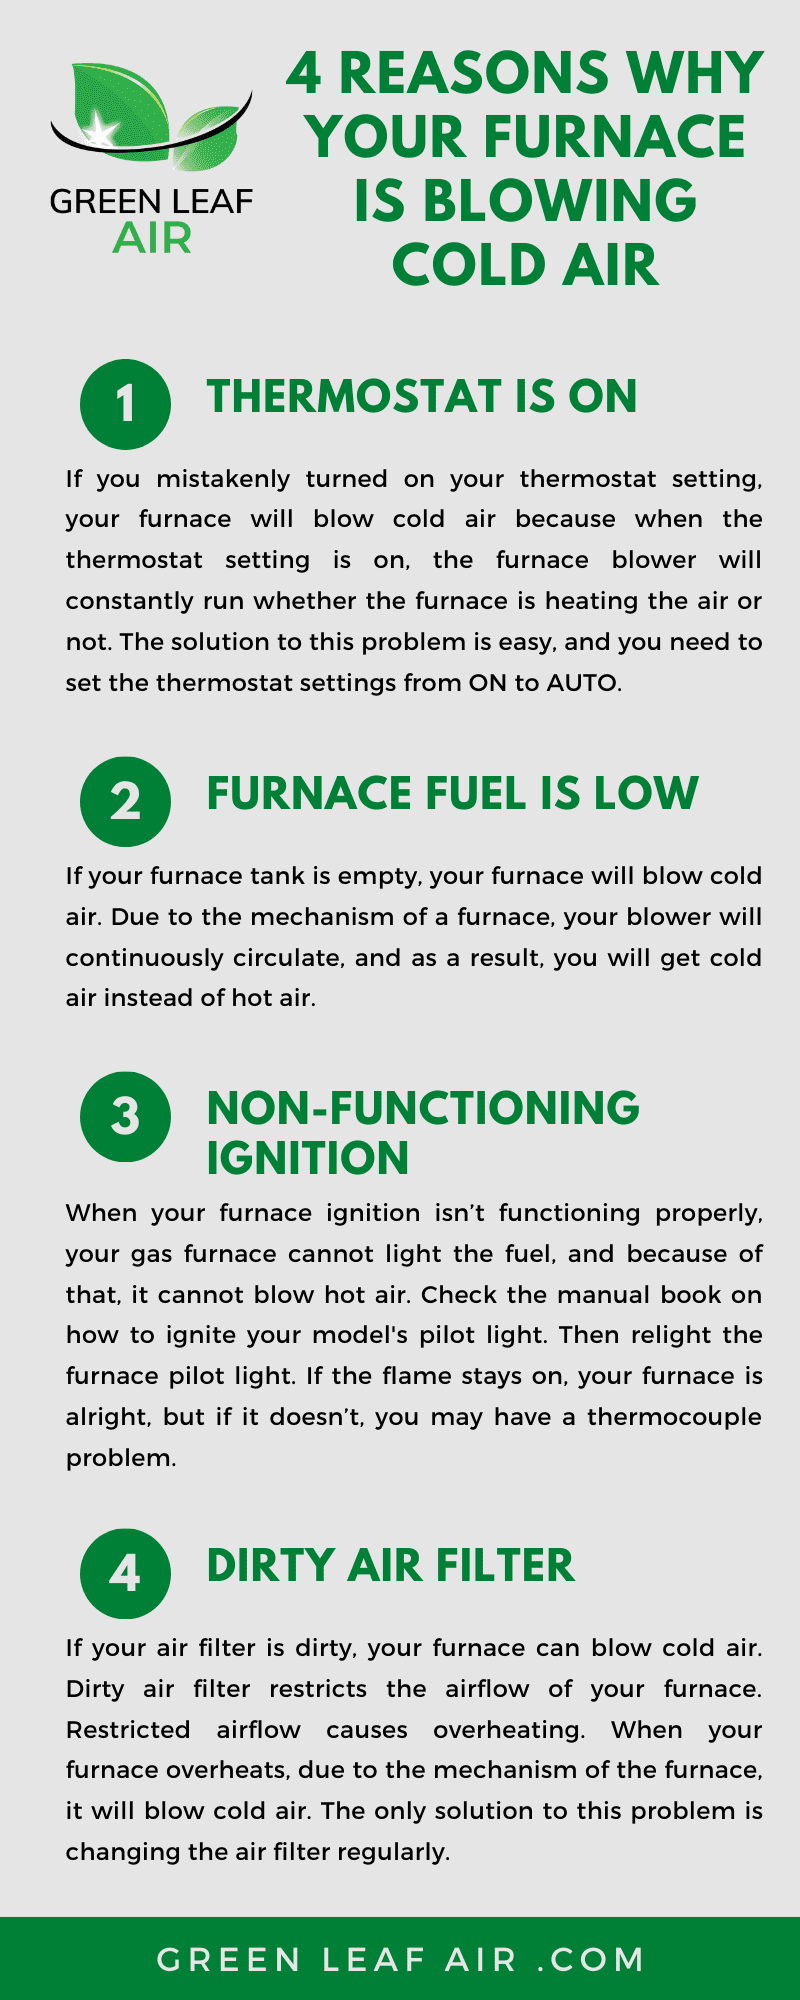 4 Reasons Why Your Furnace Is Blowing Cold Air